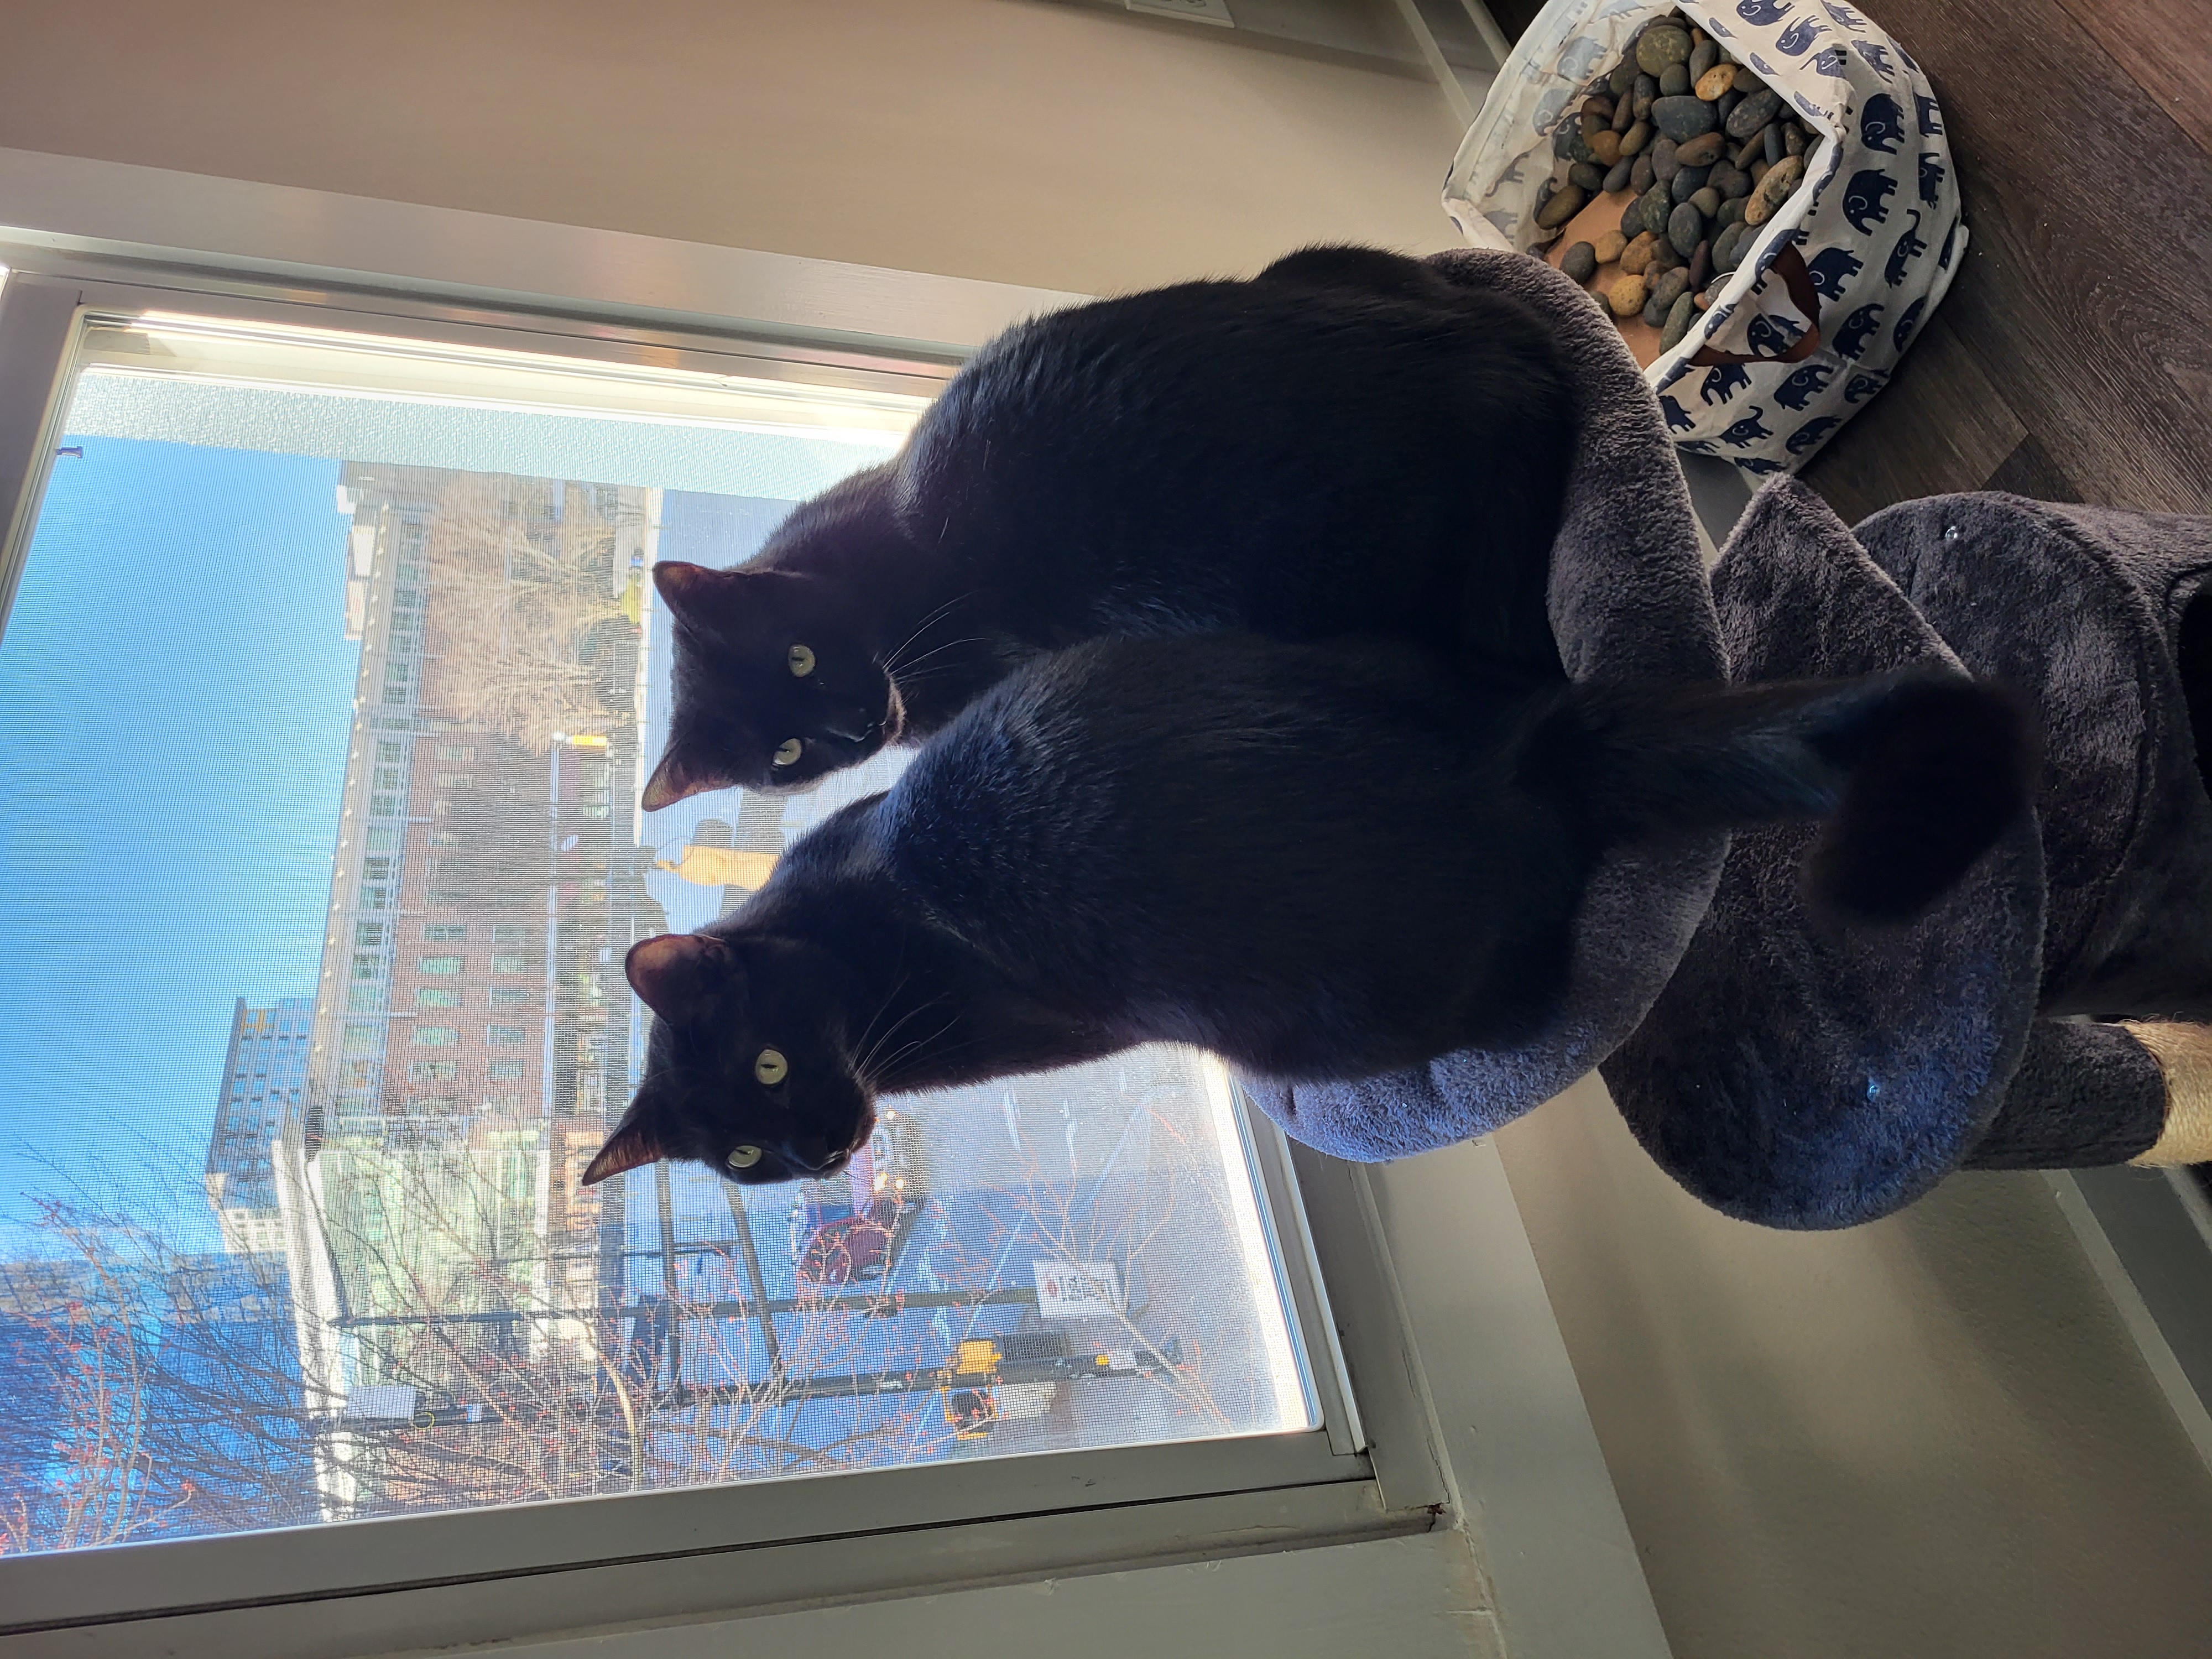 Photograph of Becca's two cats: Oscar and Mick sitting together on a perch in front of a window, looking back at the camera.